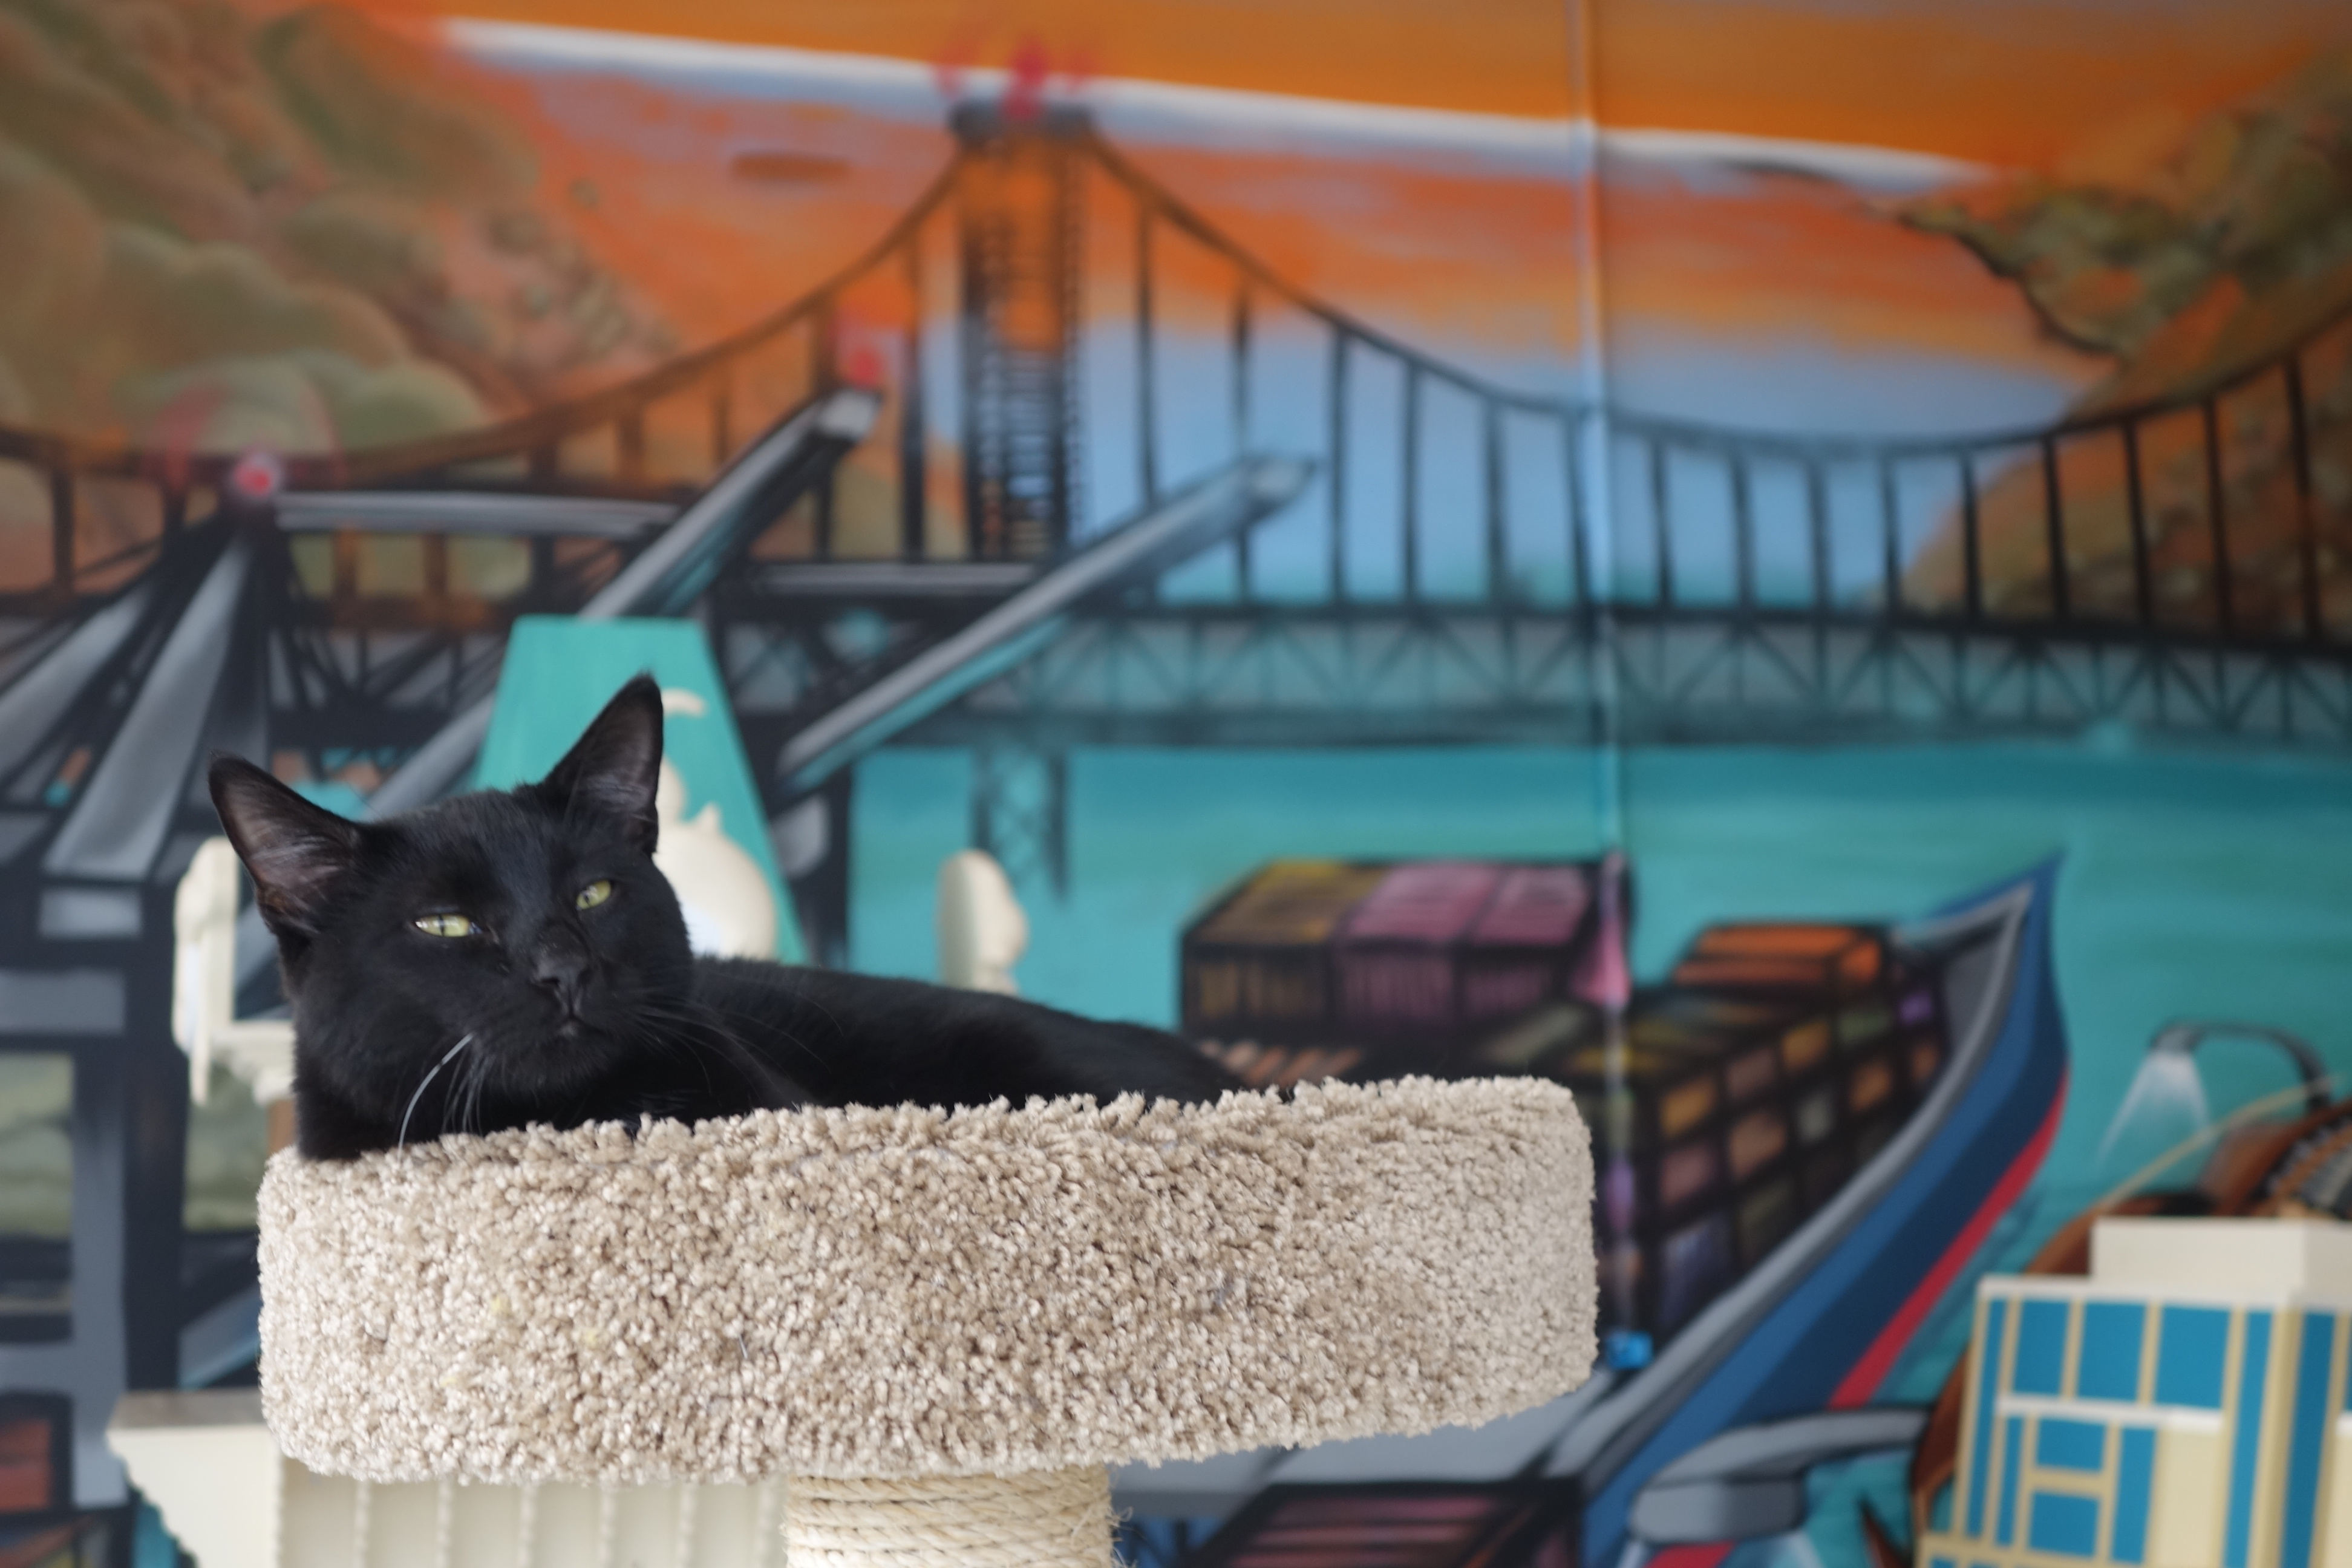 A cat lounges at Cat Town Cafe, the nation's first permanent cat cafe, during the grand opening on Oct. 25, 2014 in Oakland, Calif. (Katy Steinmetz for TIME)